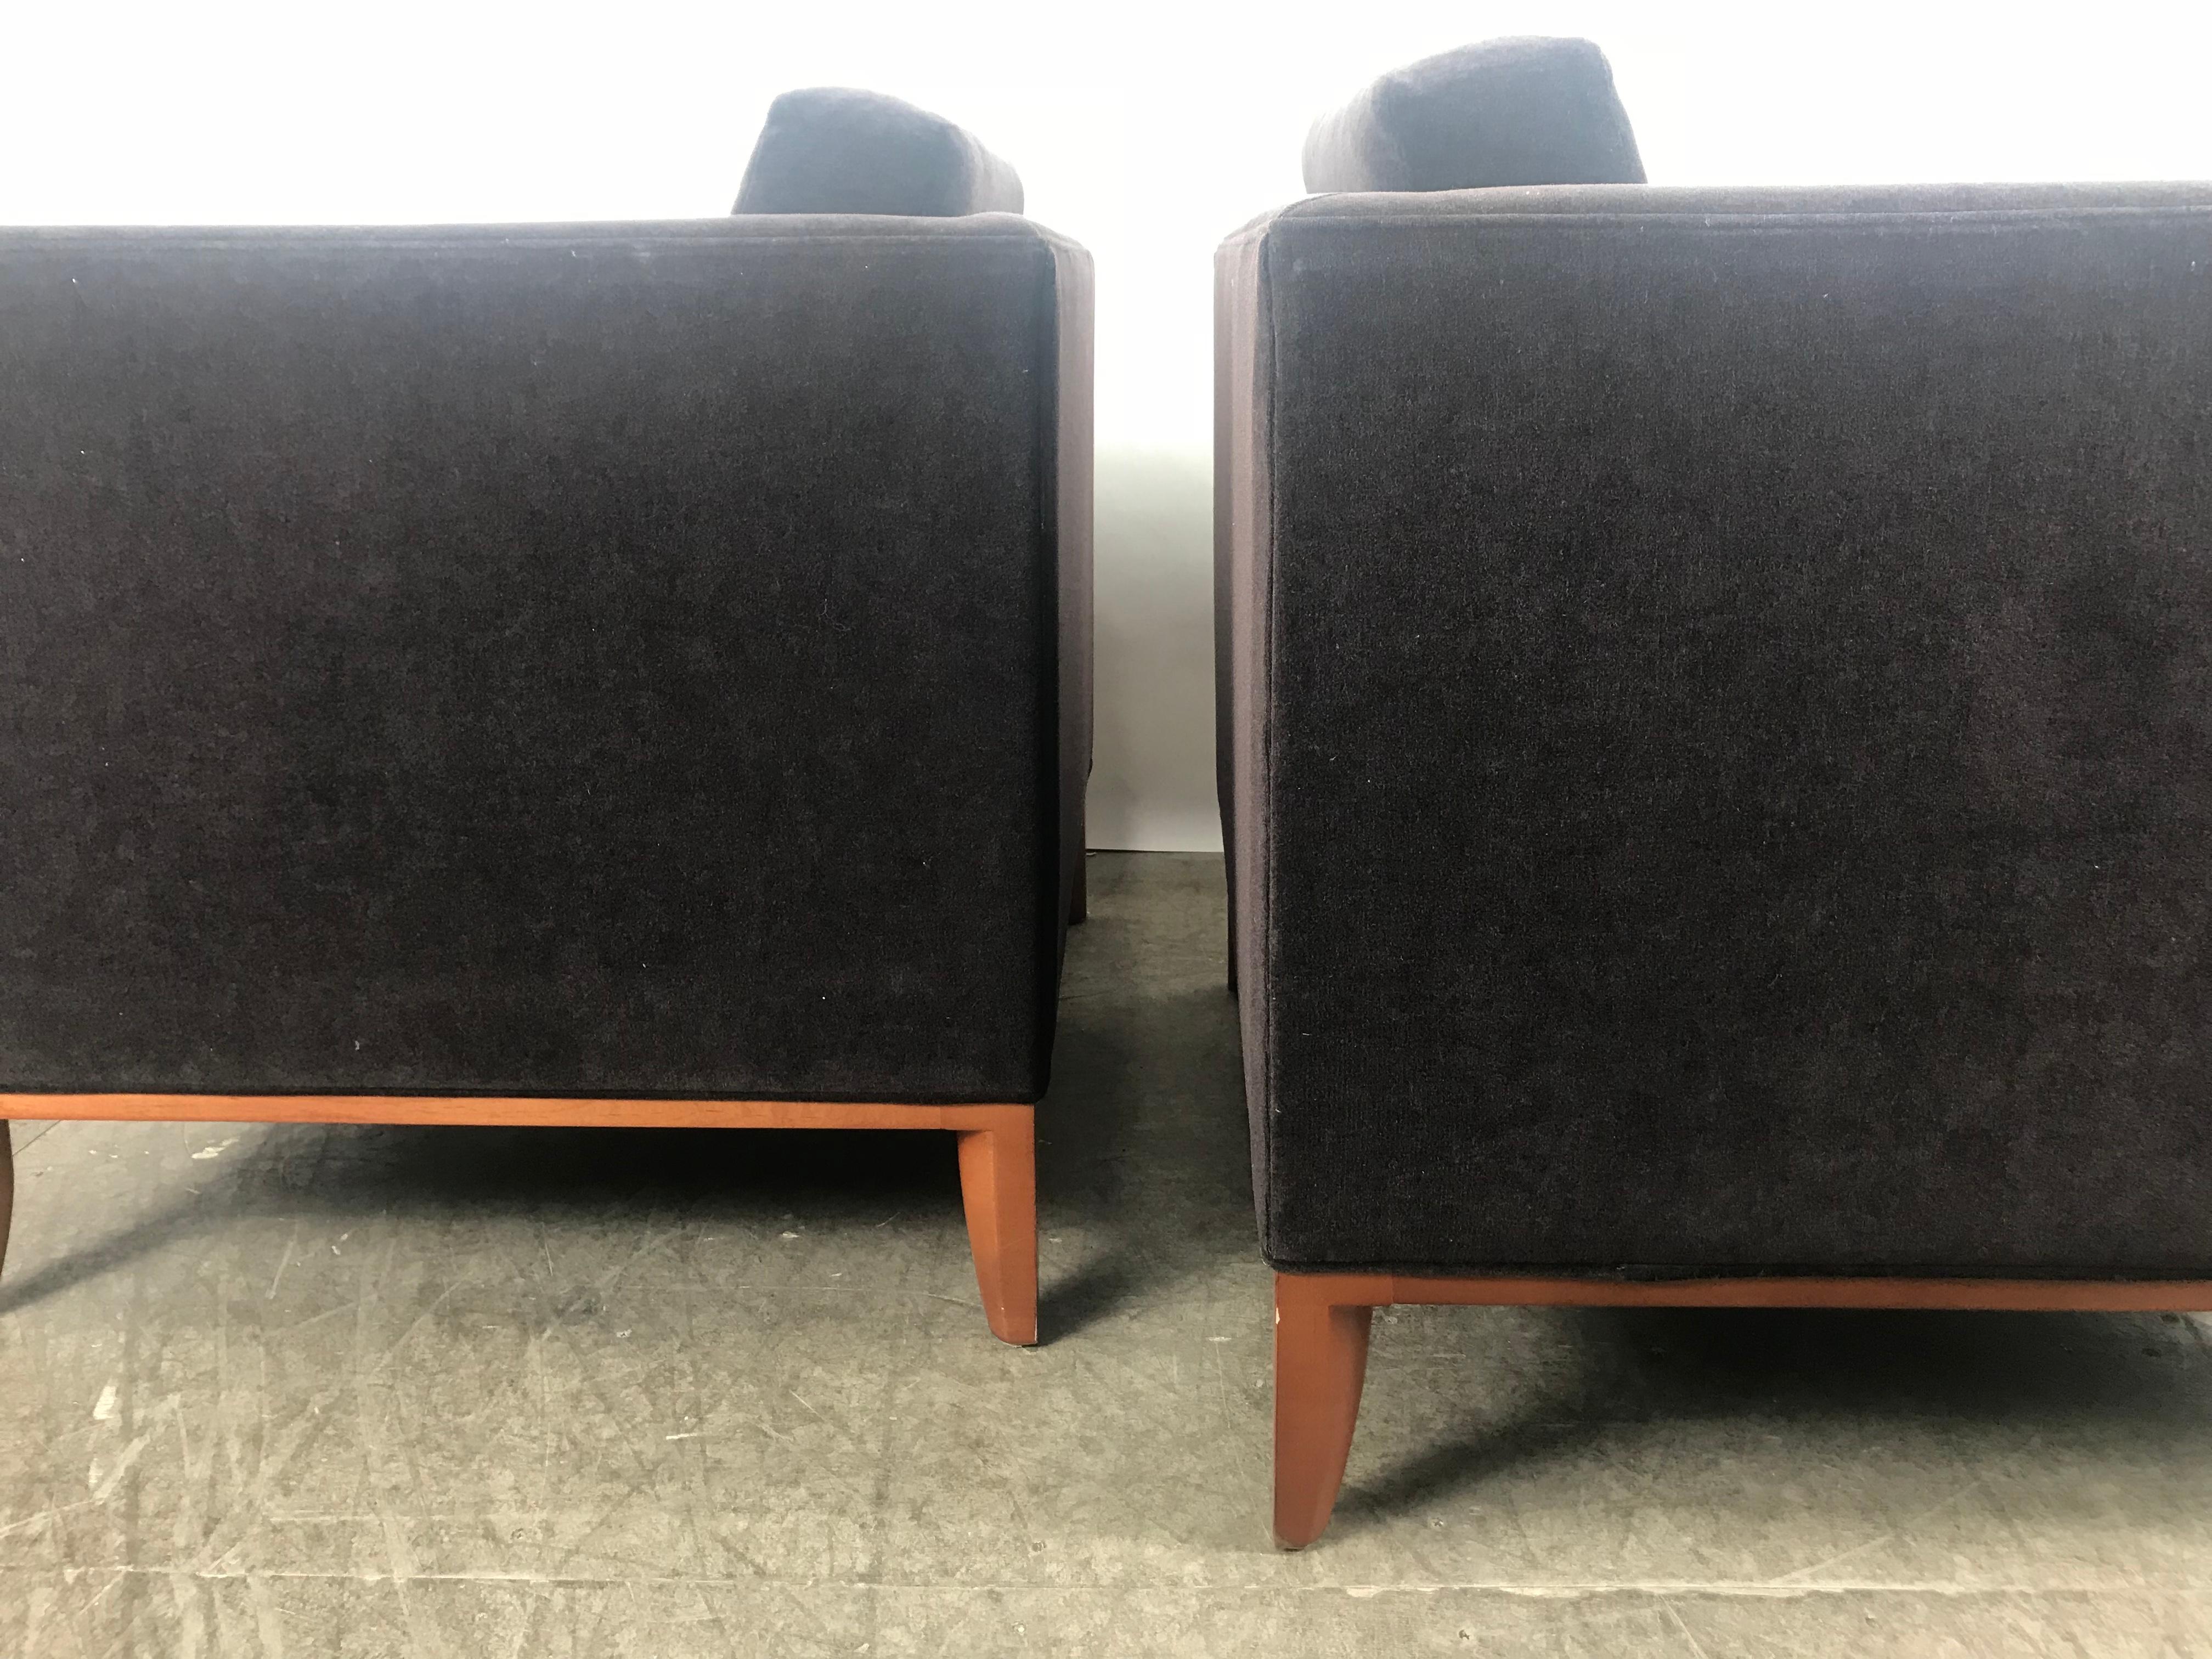 Stunning Pair of Mohair Contemporary Cube Lounge Chairs, Rembrandt Design 1